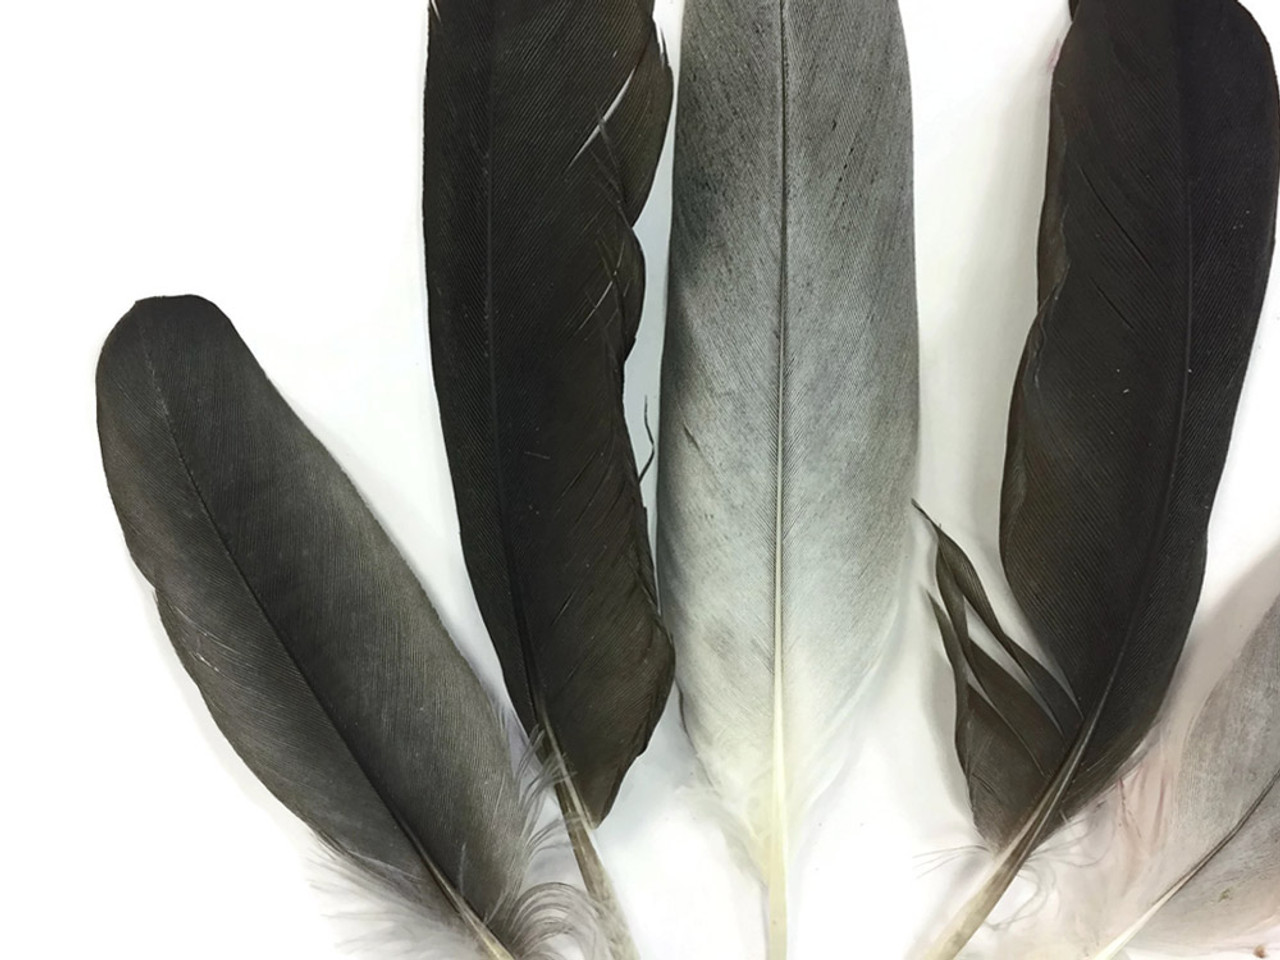 6 Pieces - 1-2 Natural Red Small African Grey Parrot Body Plumage Feathers  - Rare- Fly Tying Craft Supply| Moonlight Feather